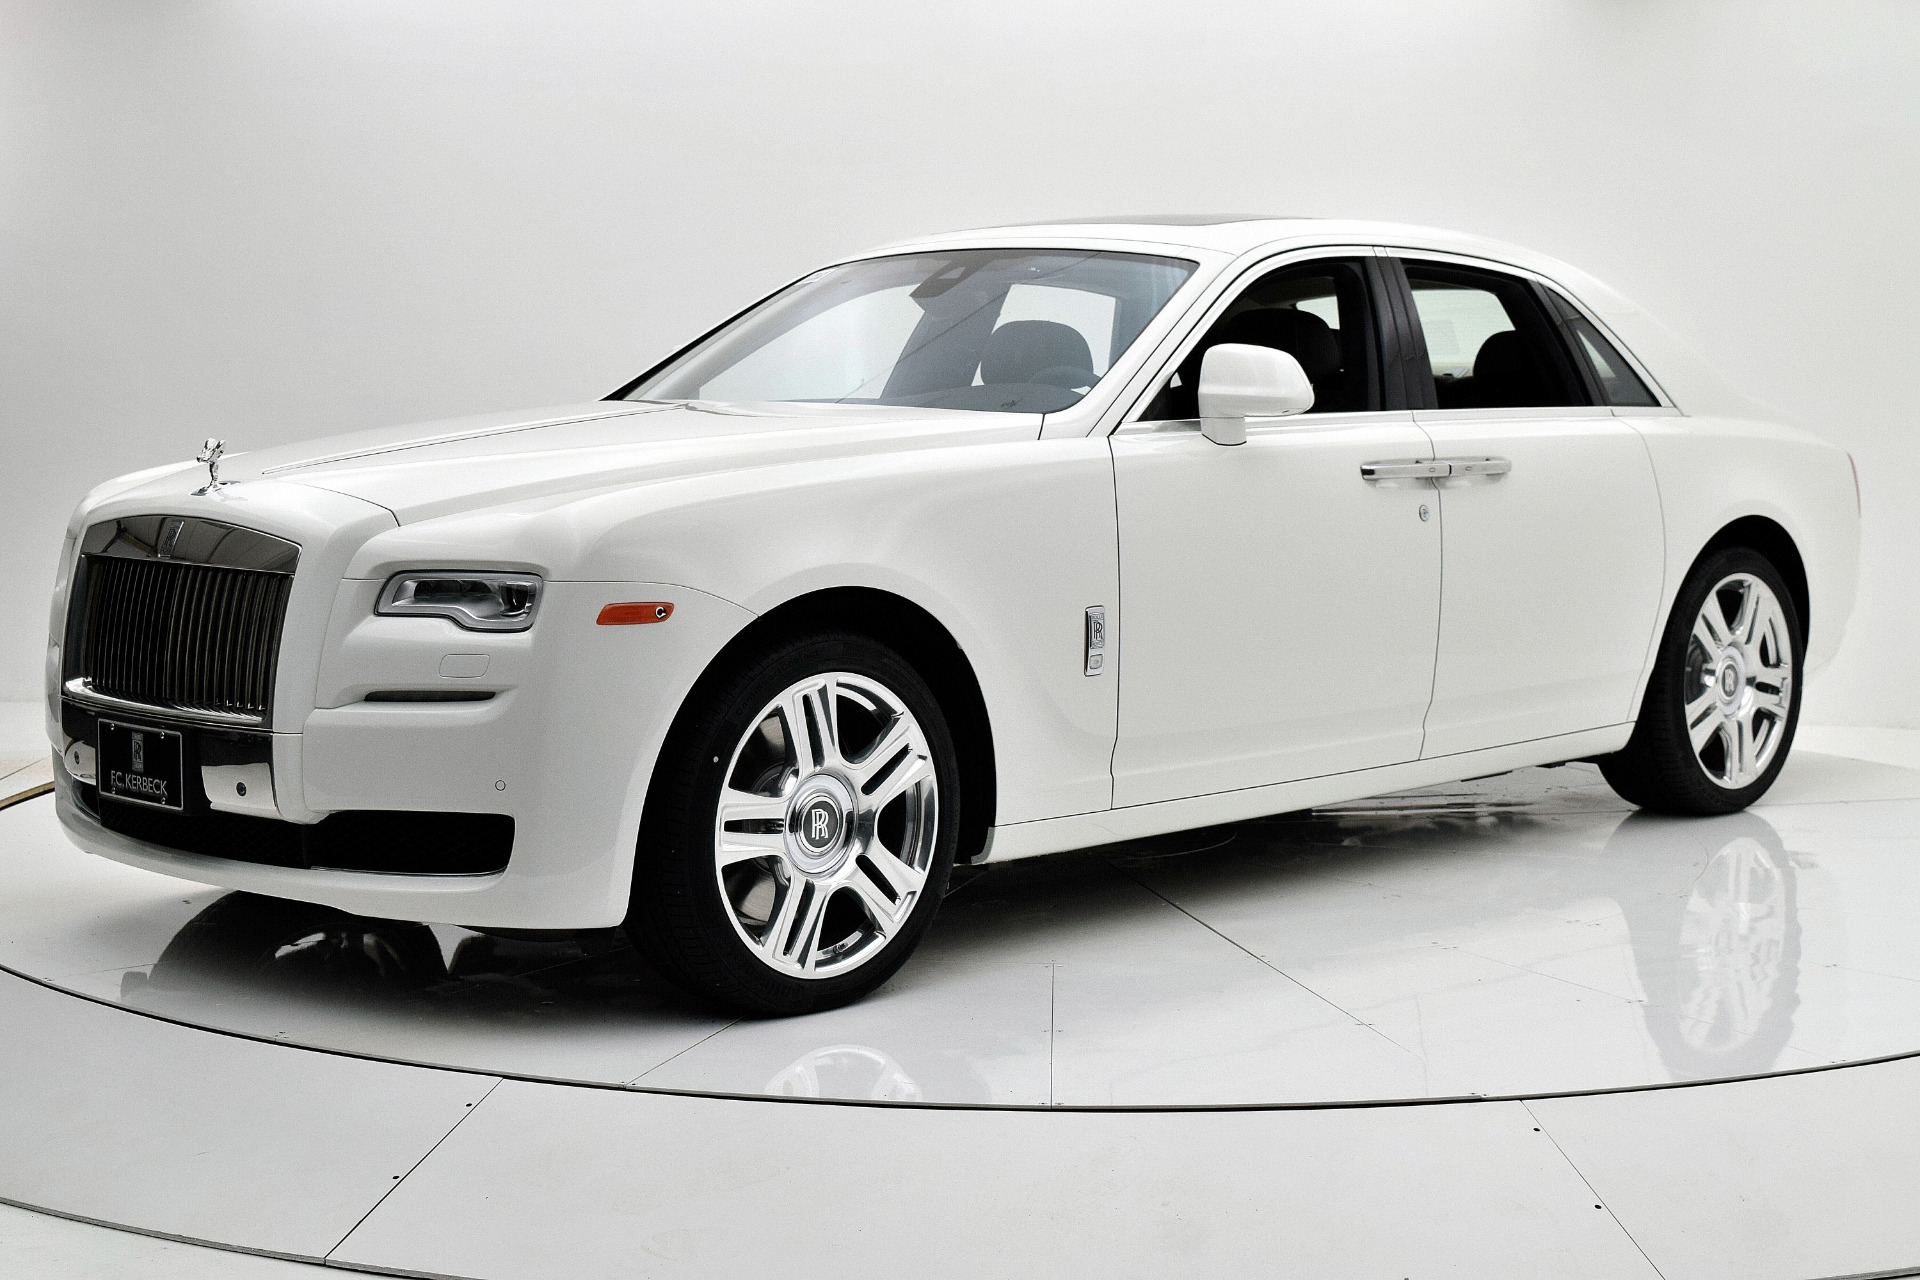 2017 Rolls-Royce Ghost Prices, Reviews, and Photos - MotorTrend